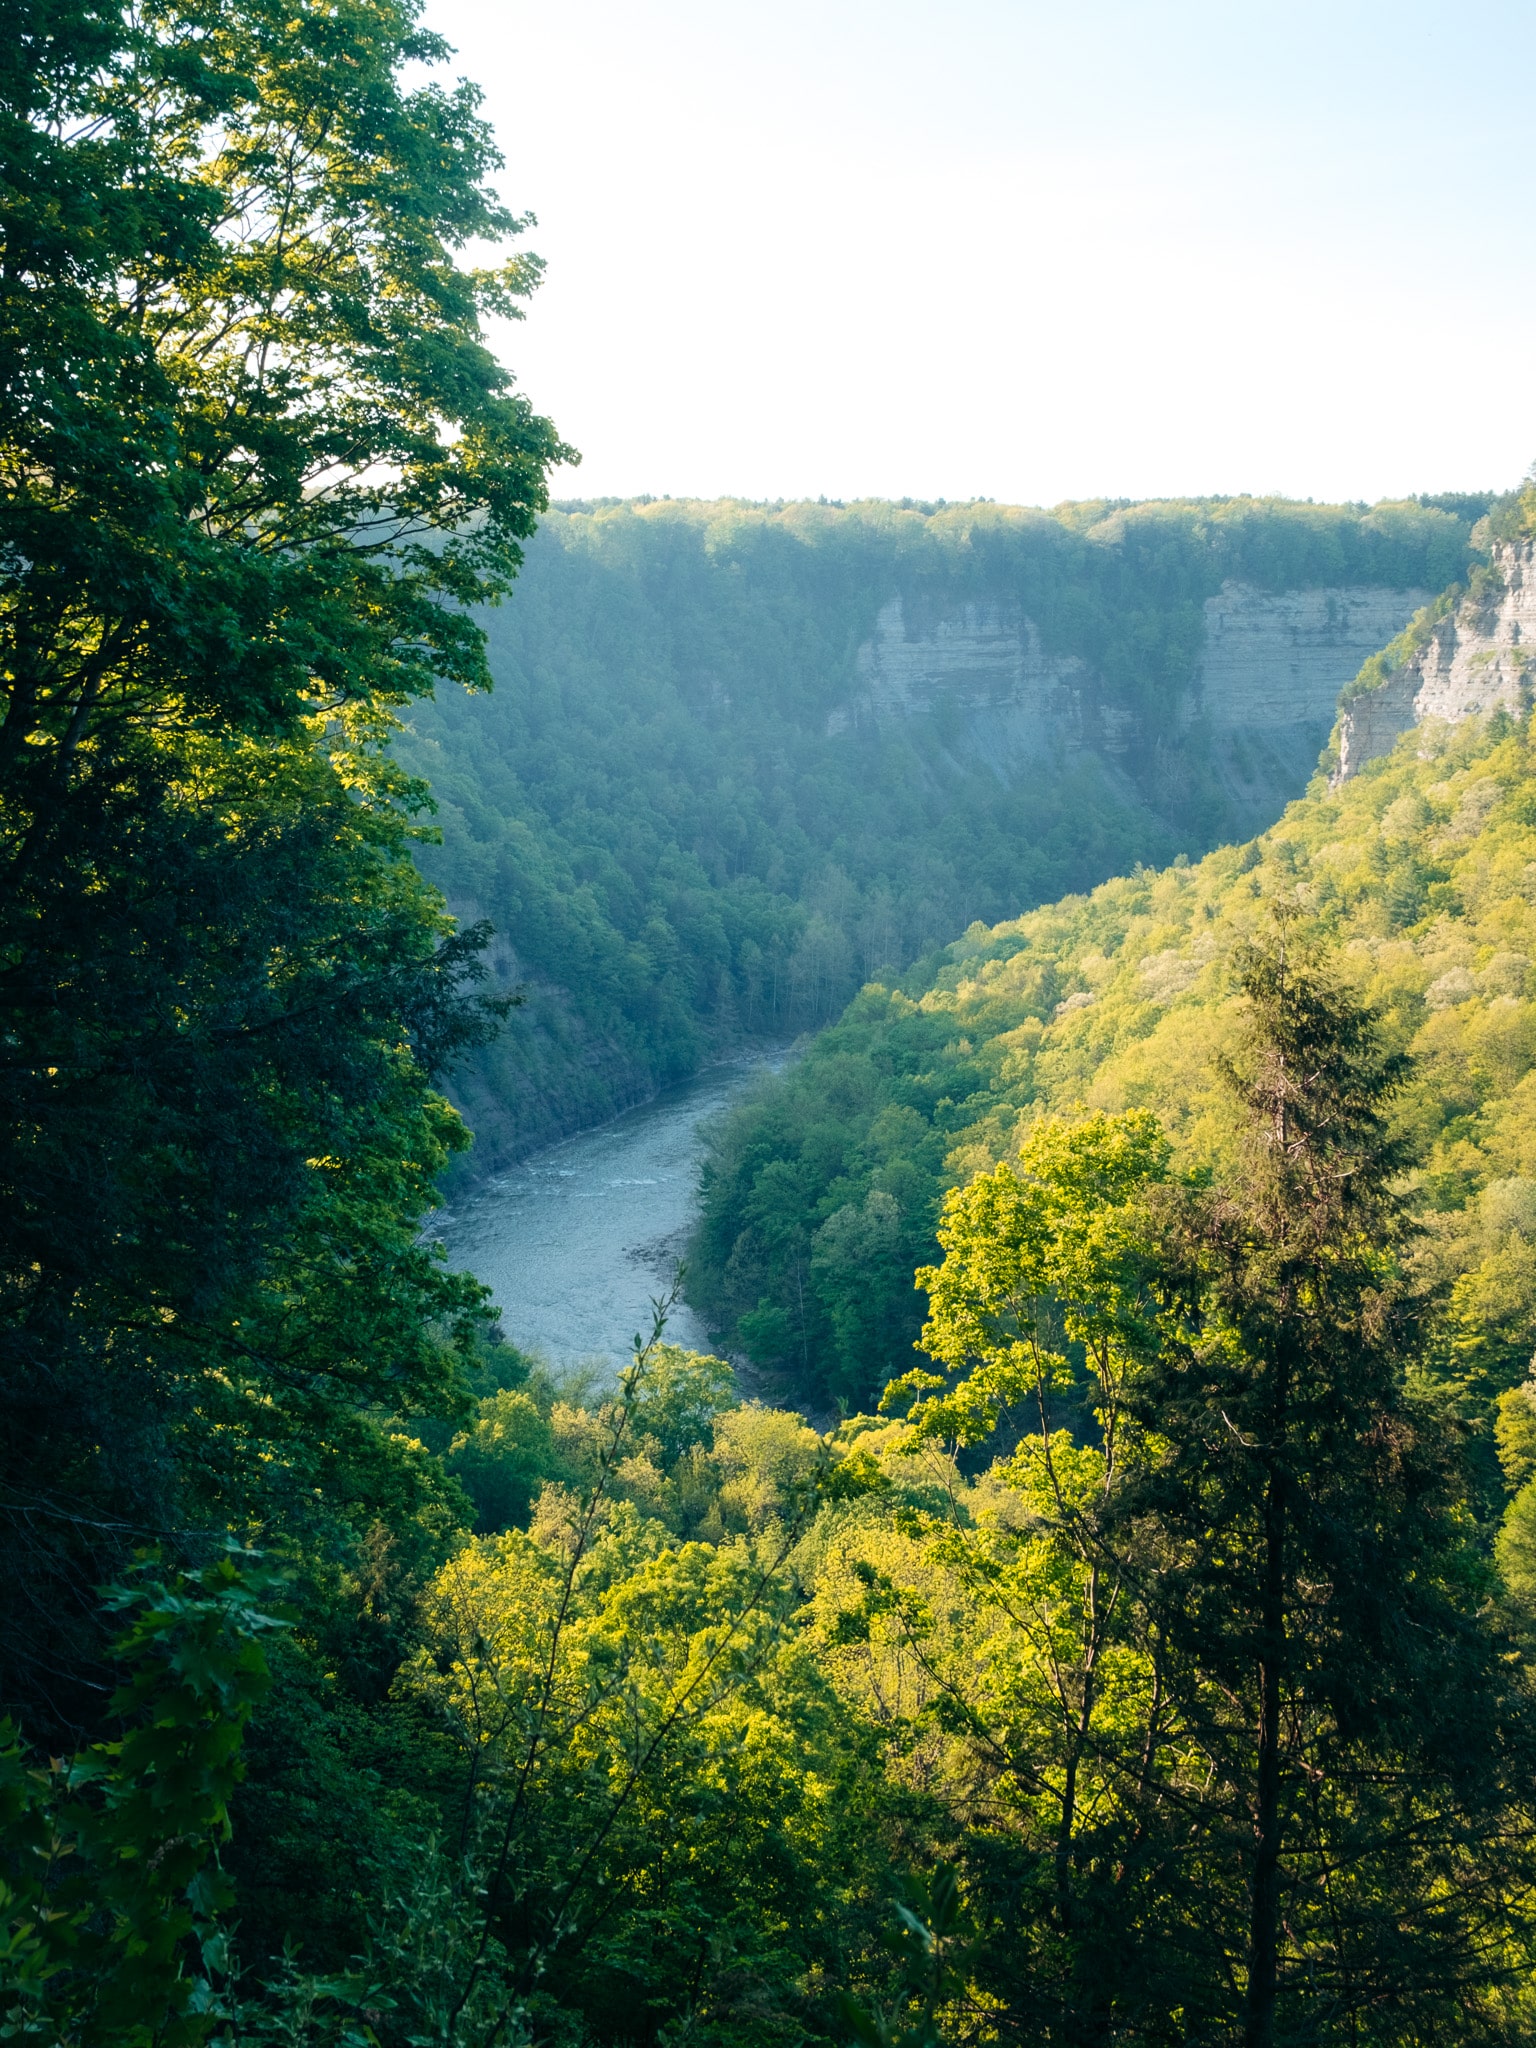 Hiking the Gorge Trail in Letchworth State Park, NY